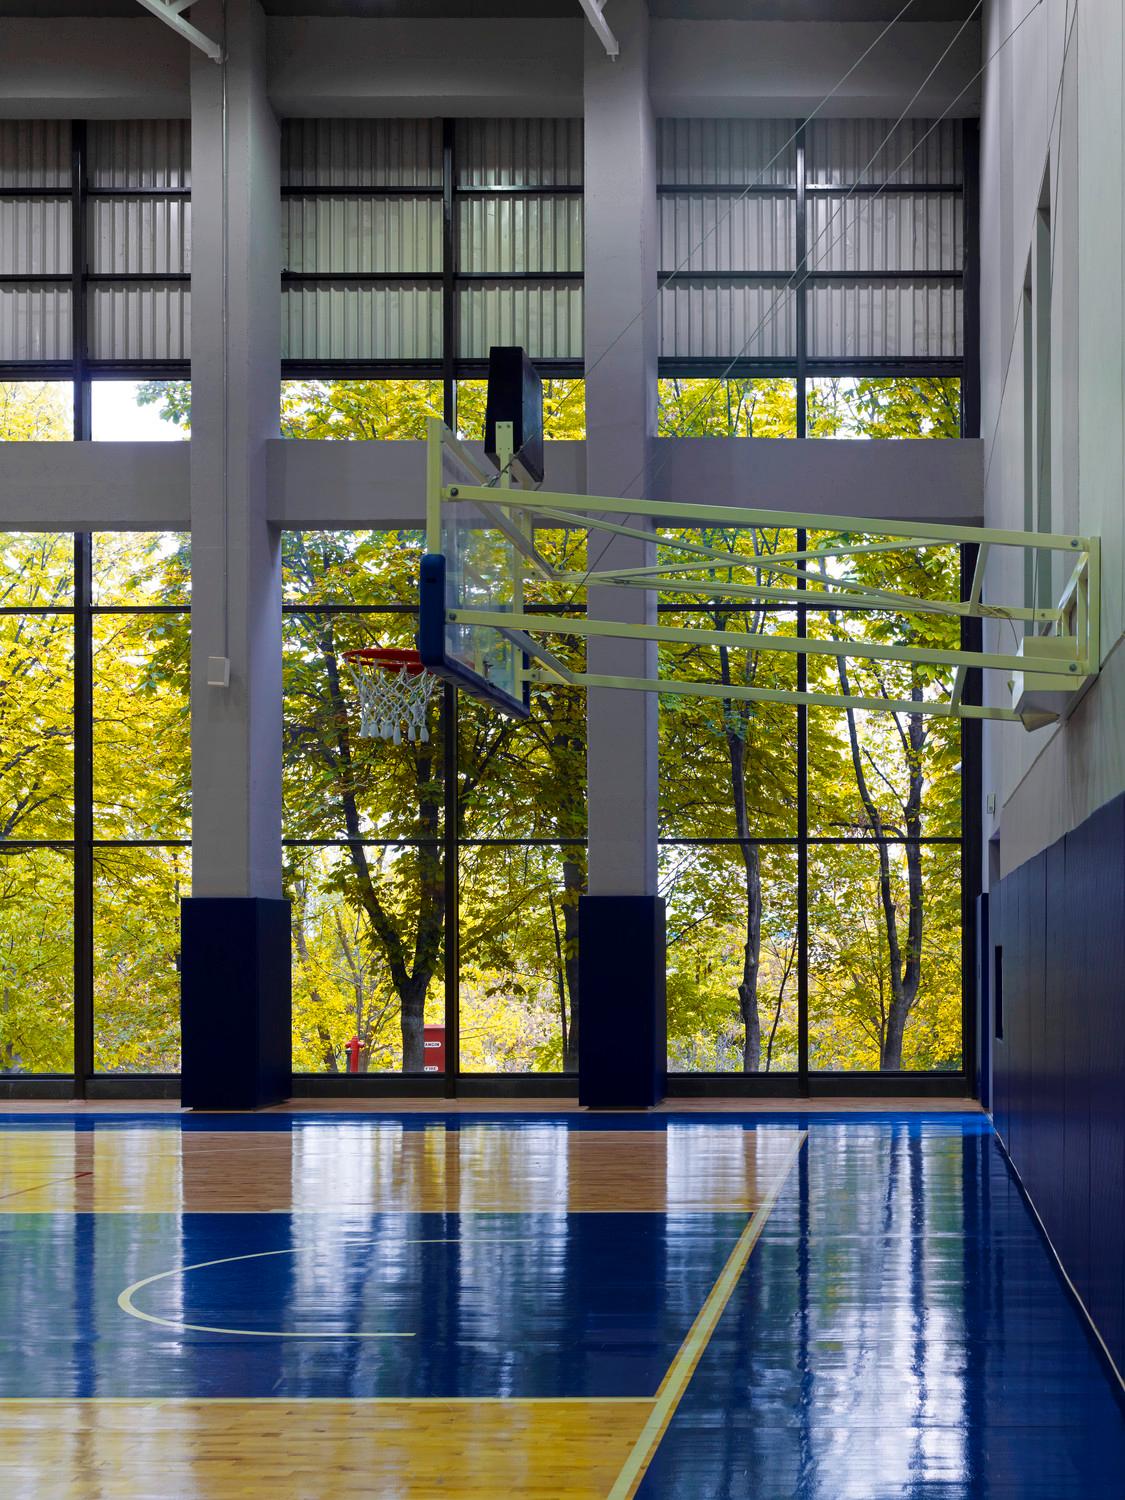 Sports hall interior, full height glazing facing the surrounding landscape